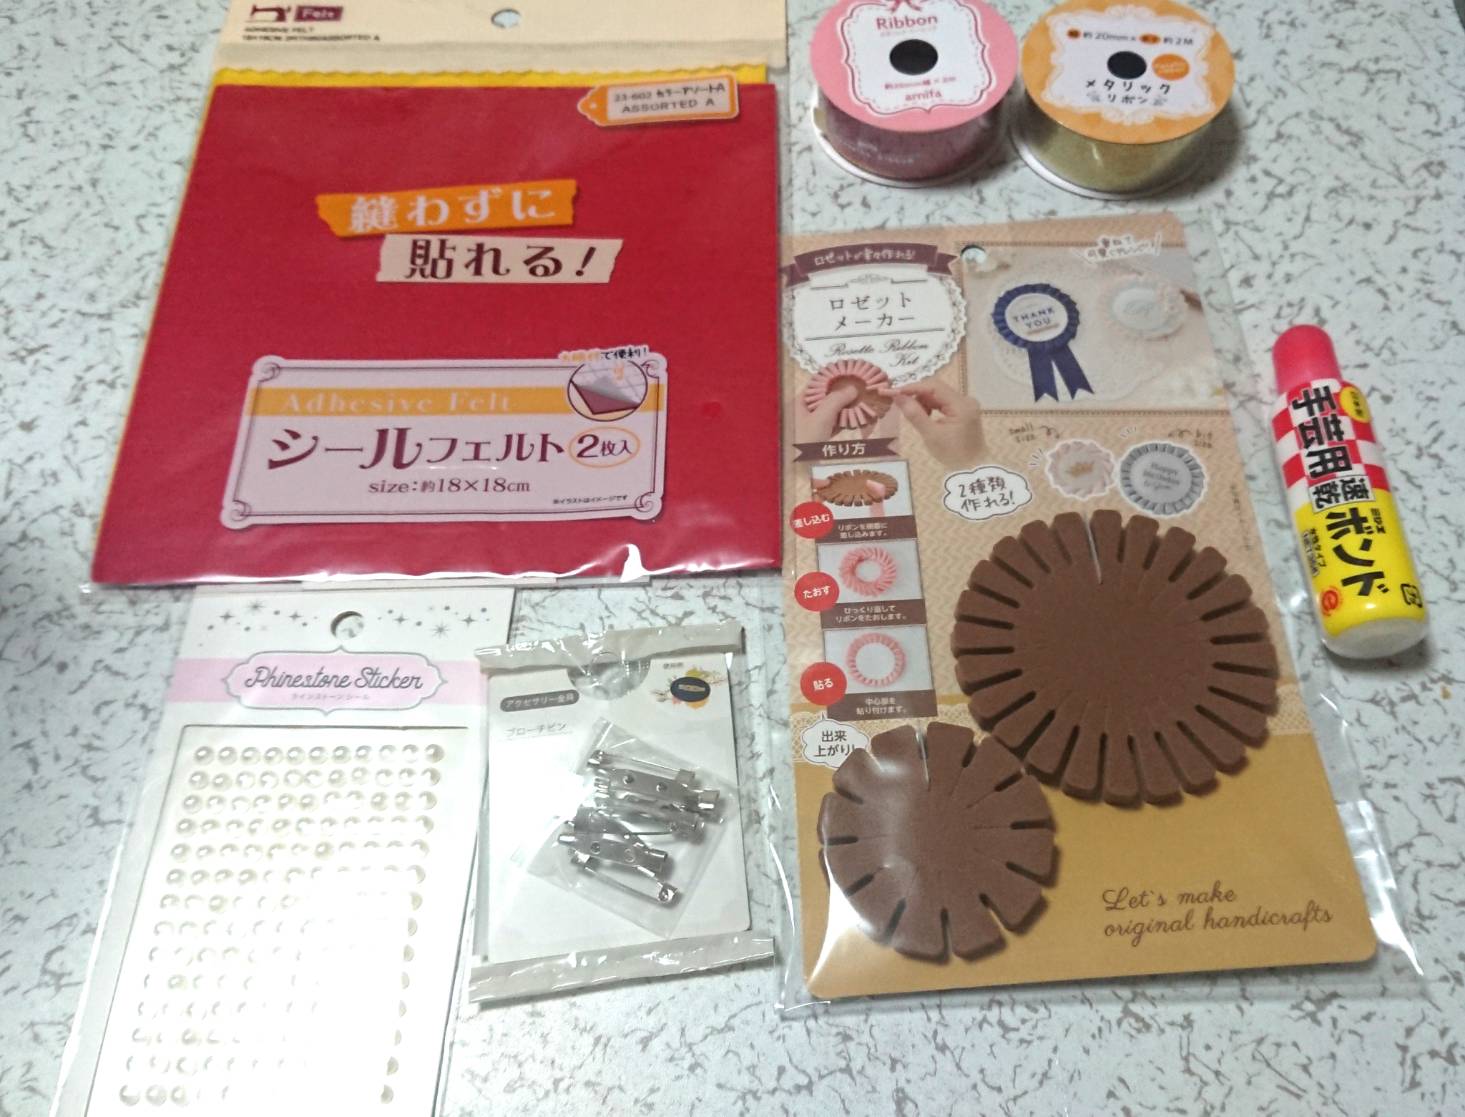 Materials for making rosettes